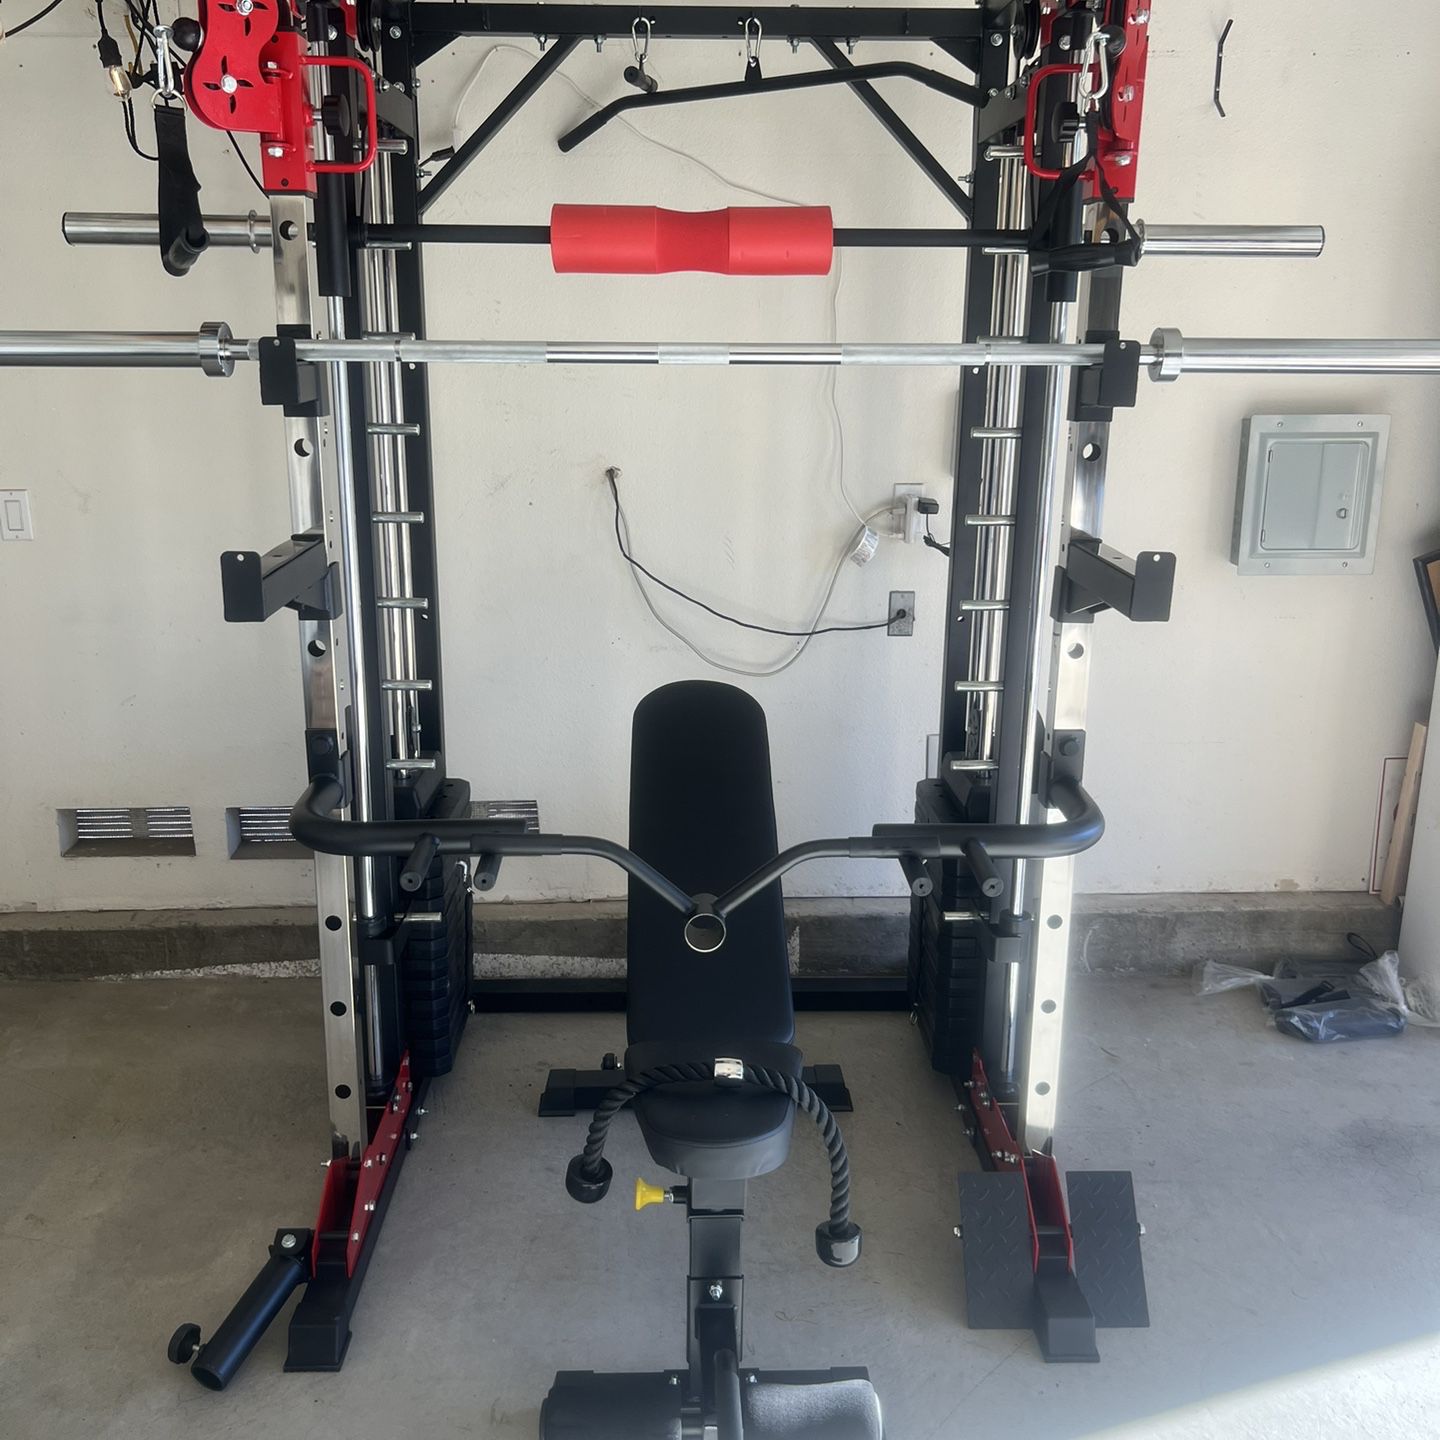 💥Free Delivery/Install💥 Complete Smith Machine Bundle 💪💪